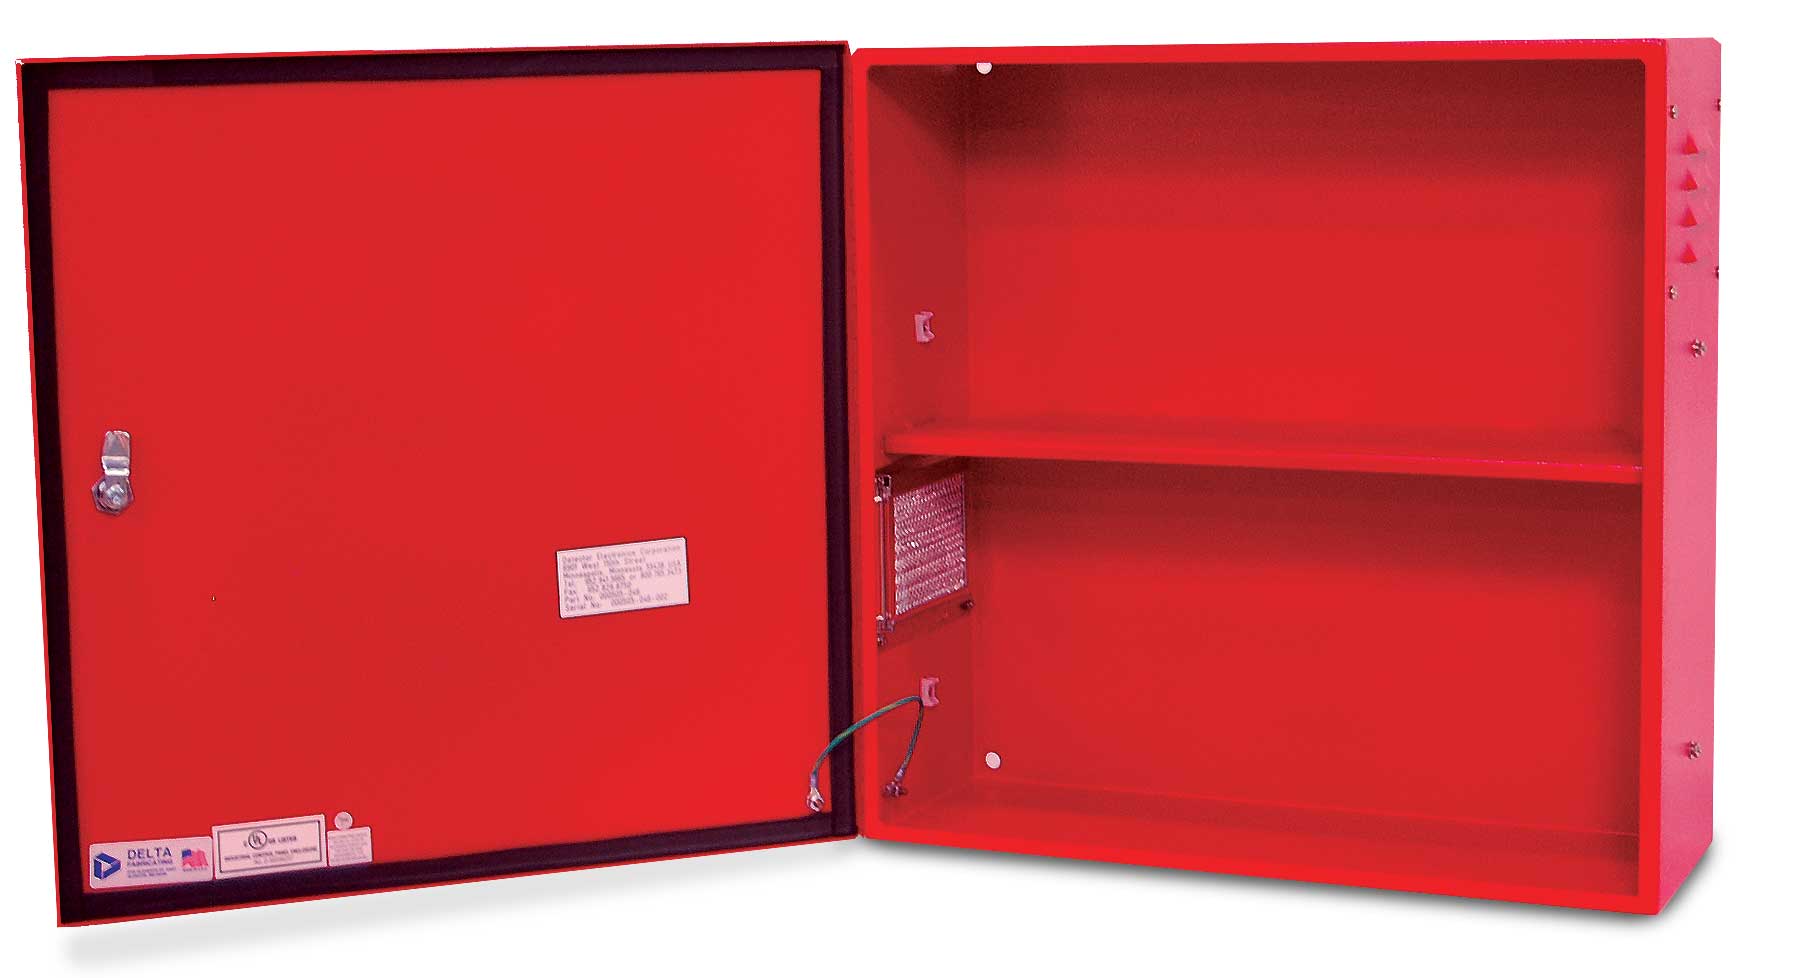 Ultra-FDRS Flame Detection and Extinguishing System batter enclosure cabinet door open